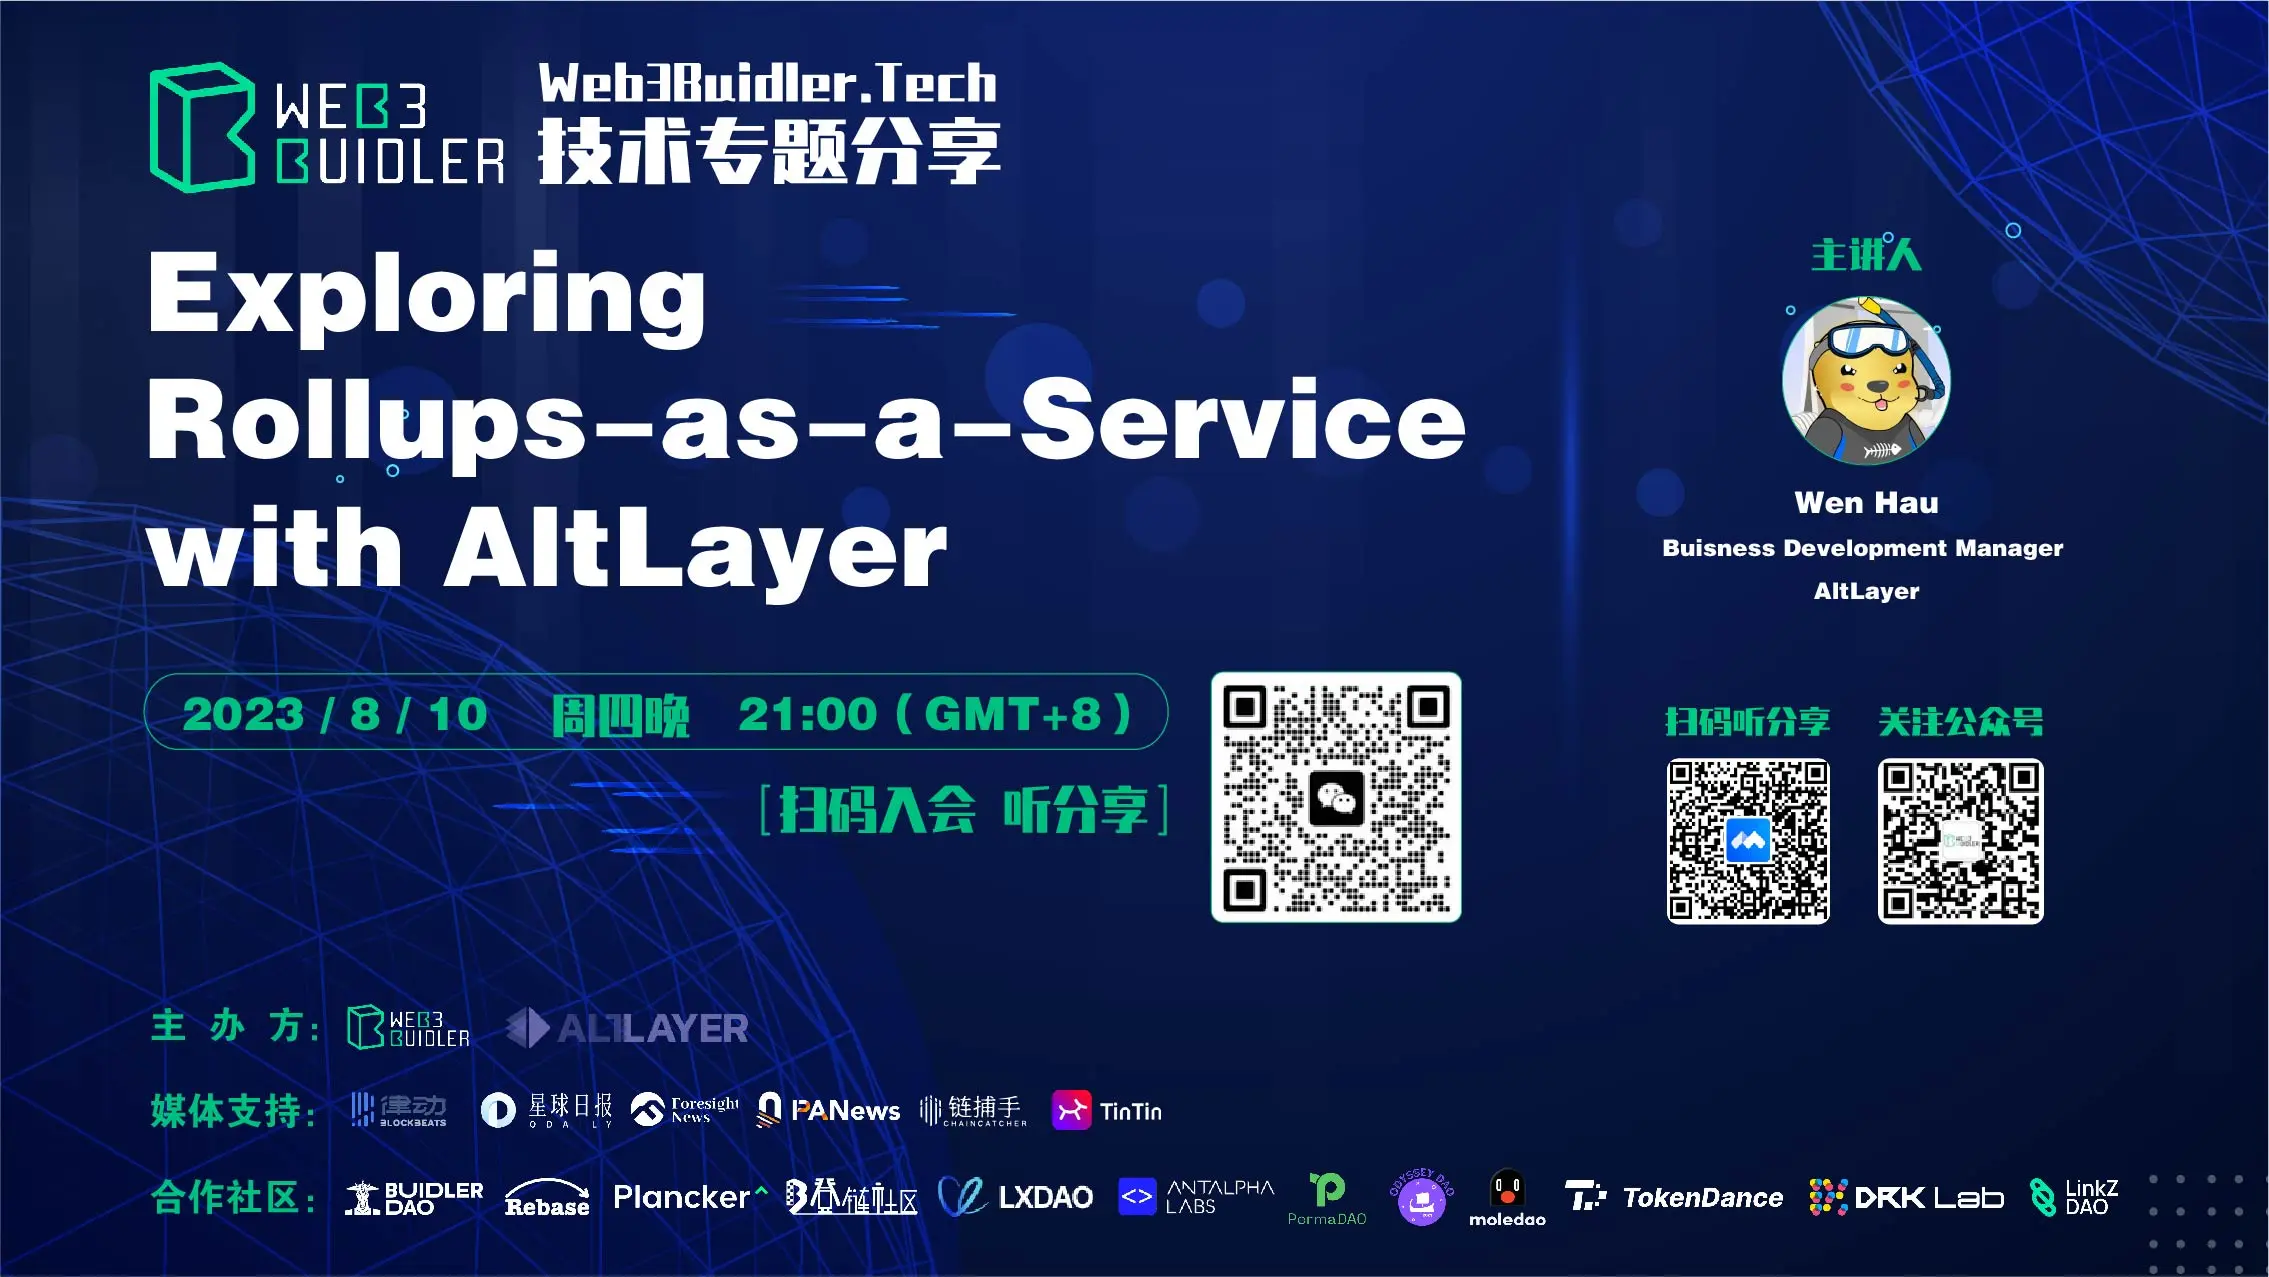 【Web3BuidlerTech】Exploring Rollups-as-a-Service with AltLayer